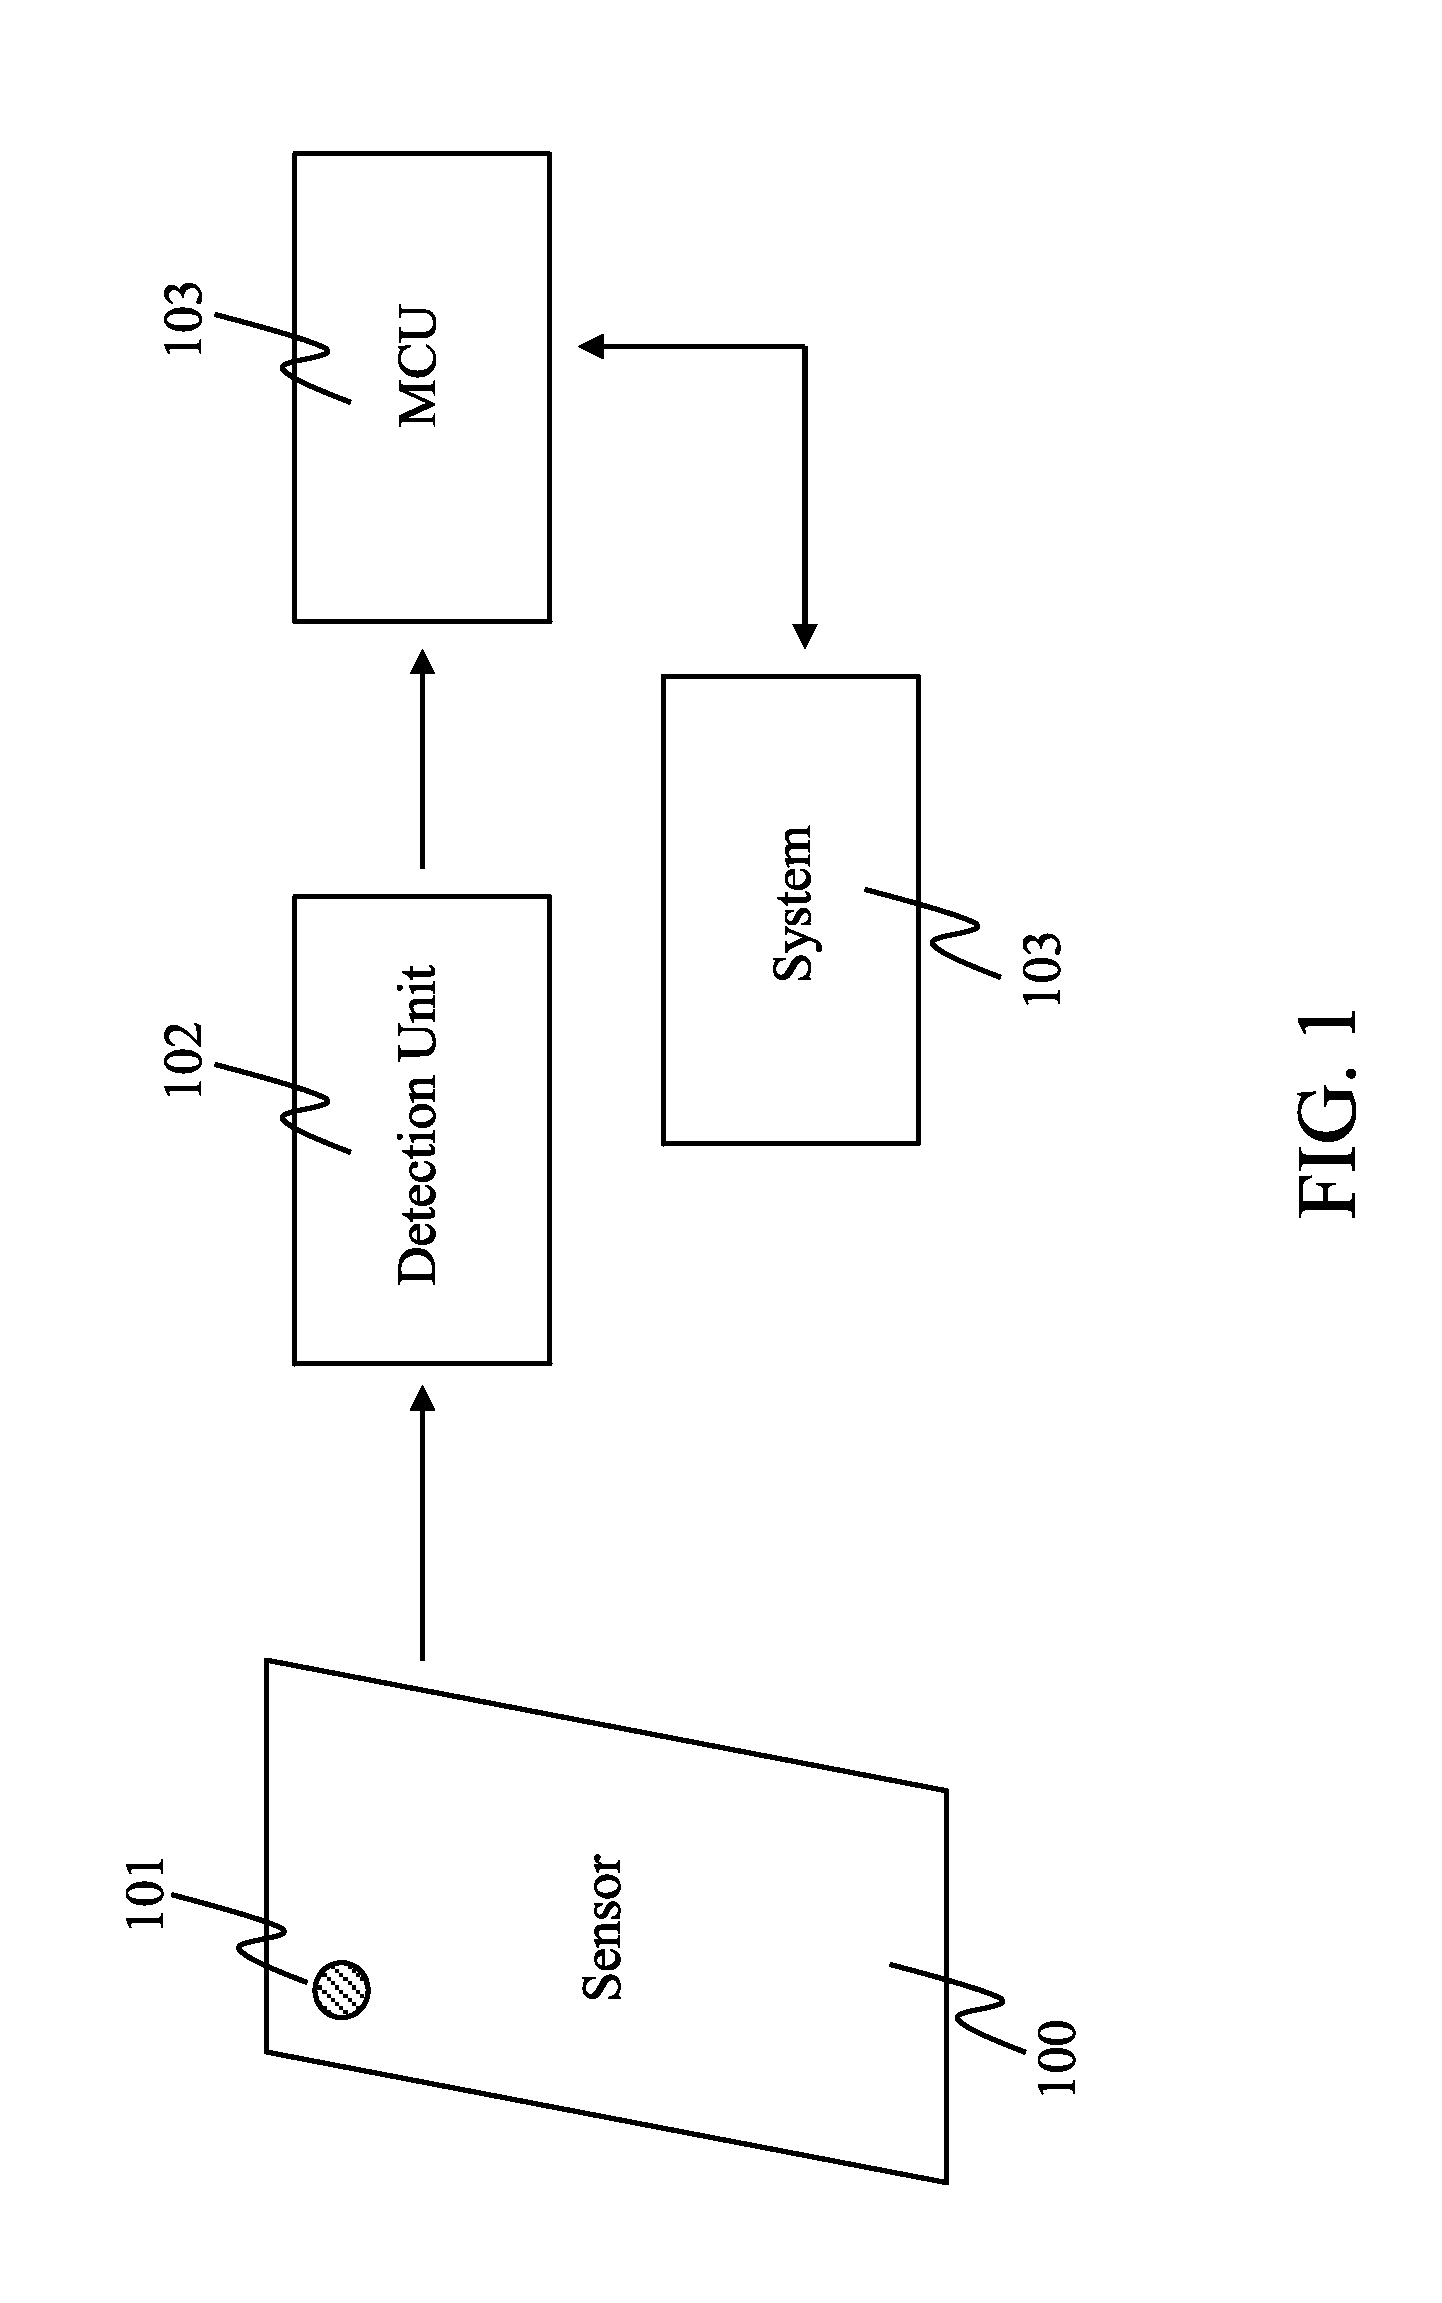 Unlocking Mechanism for a Touch Screen Device